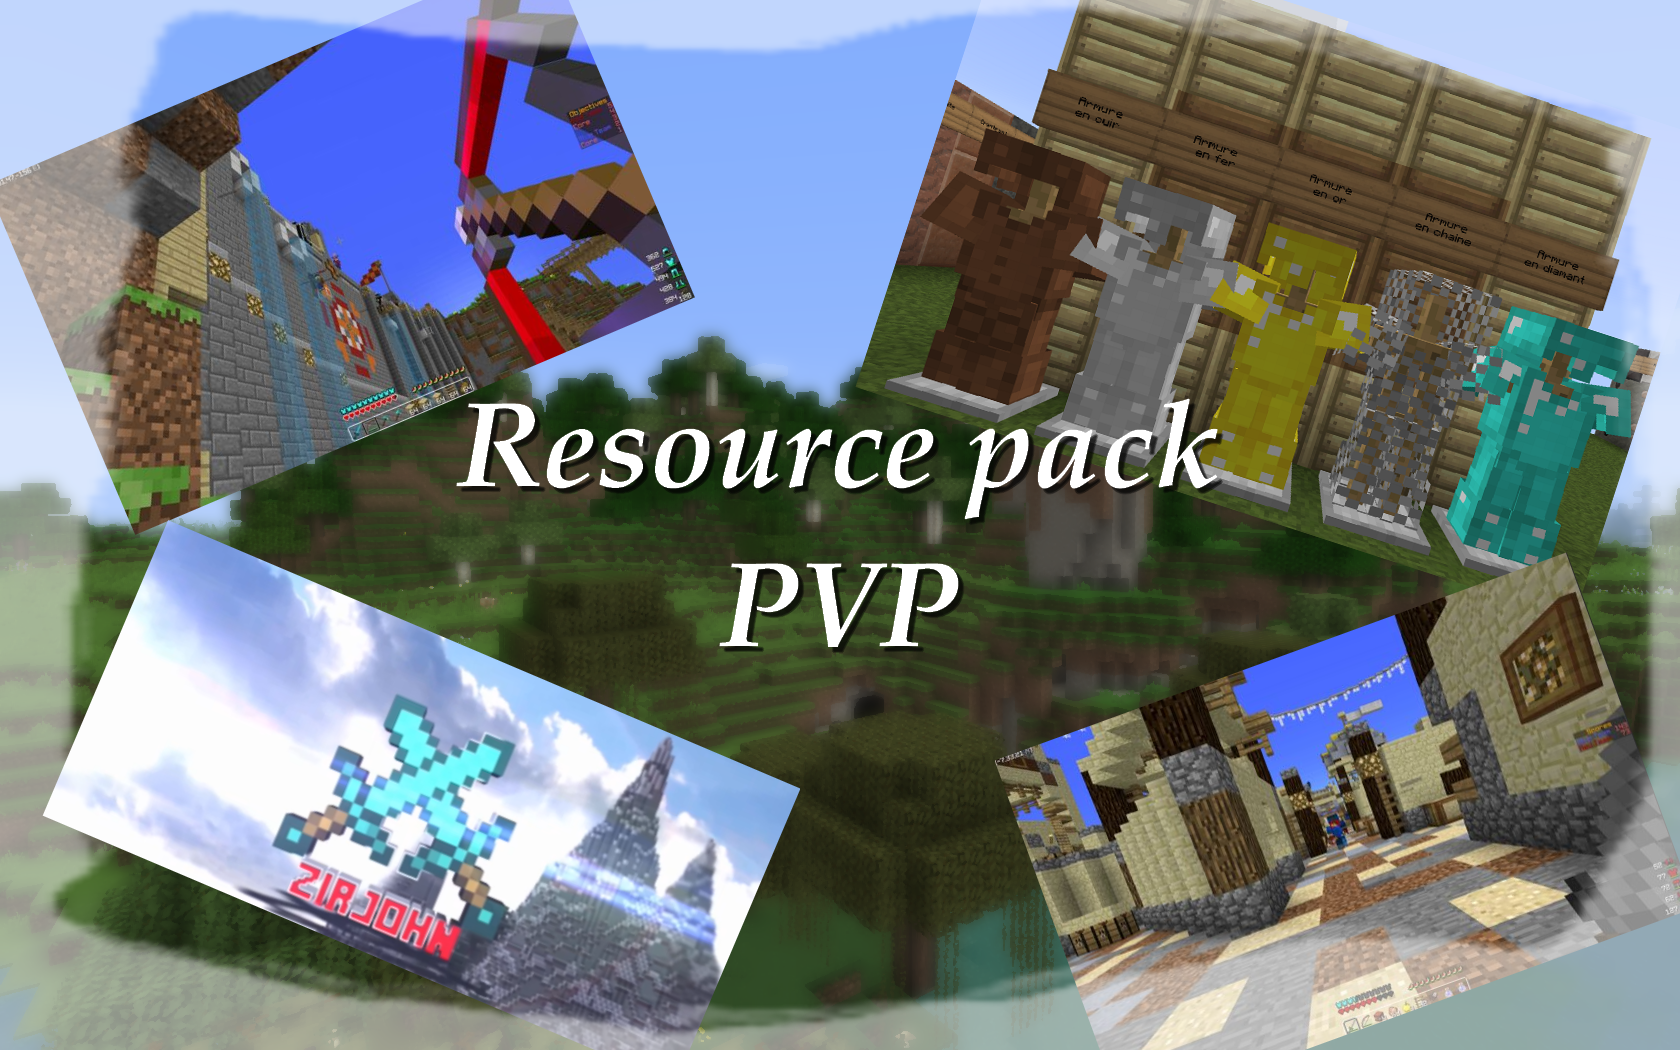 what is minecraft resource packs